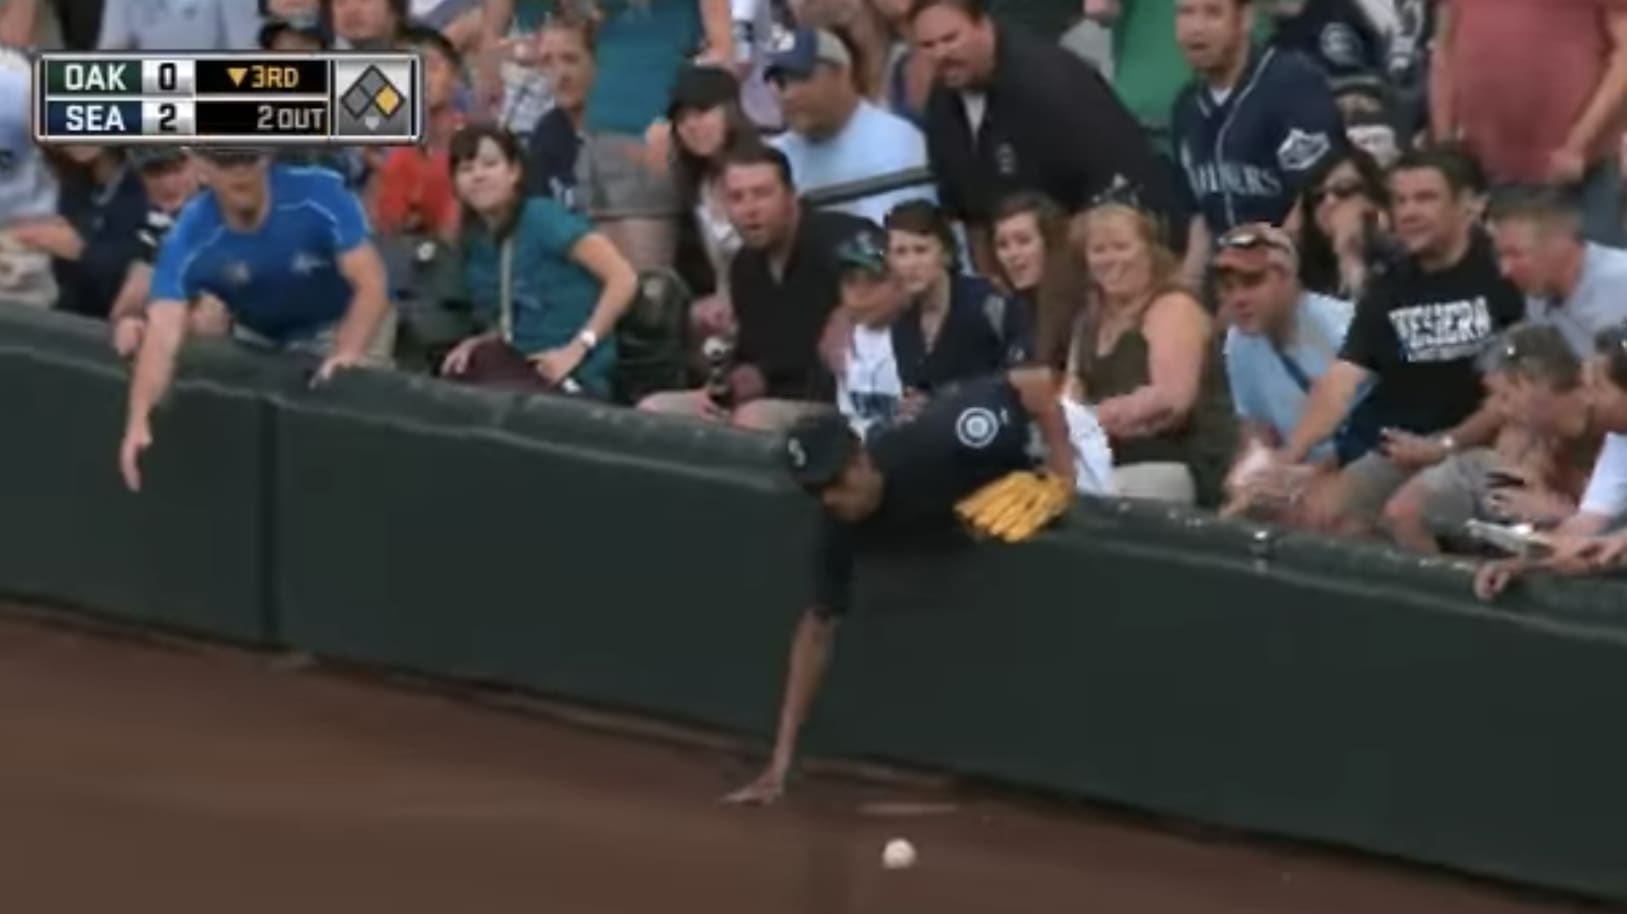 VIDEO: Remembering When the Ichiro Impersonator Interferred With a Live Ball During Mariners Game